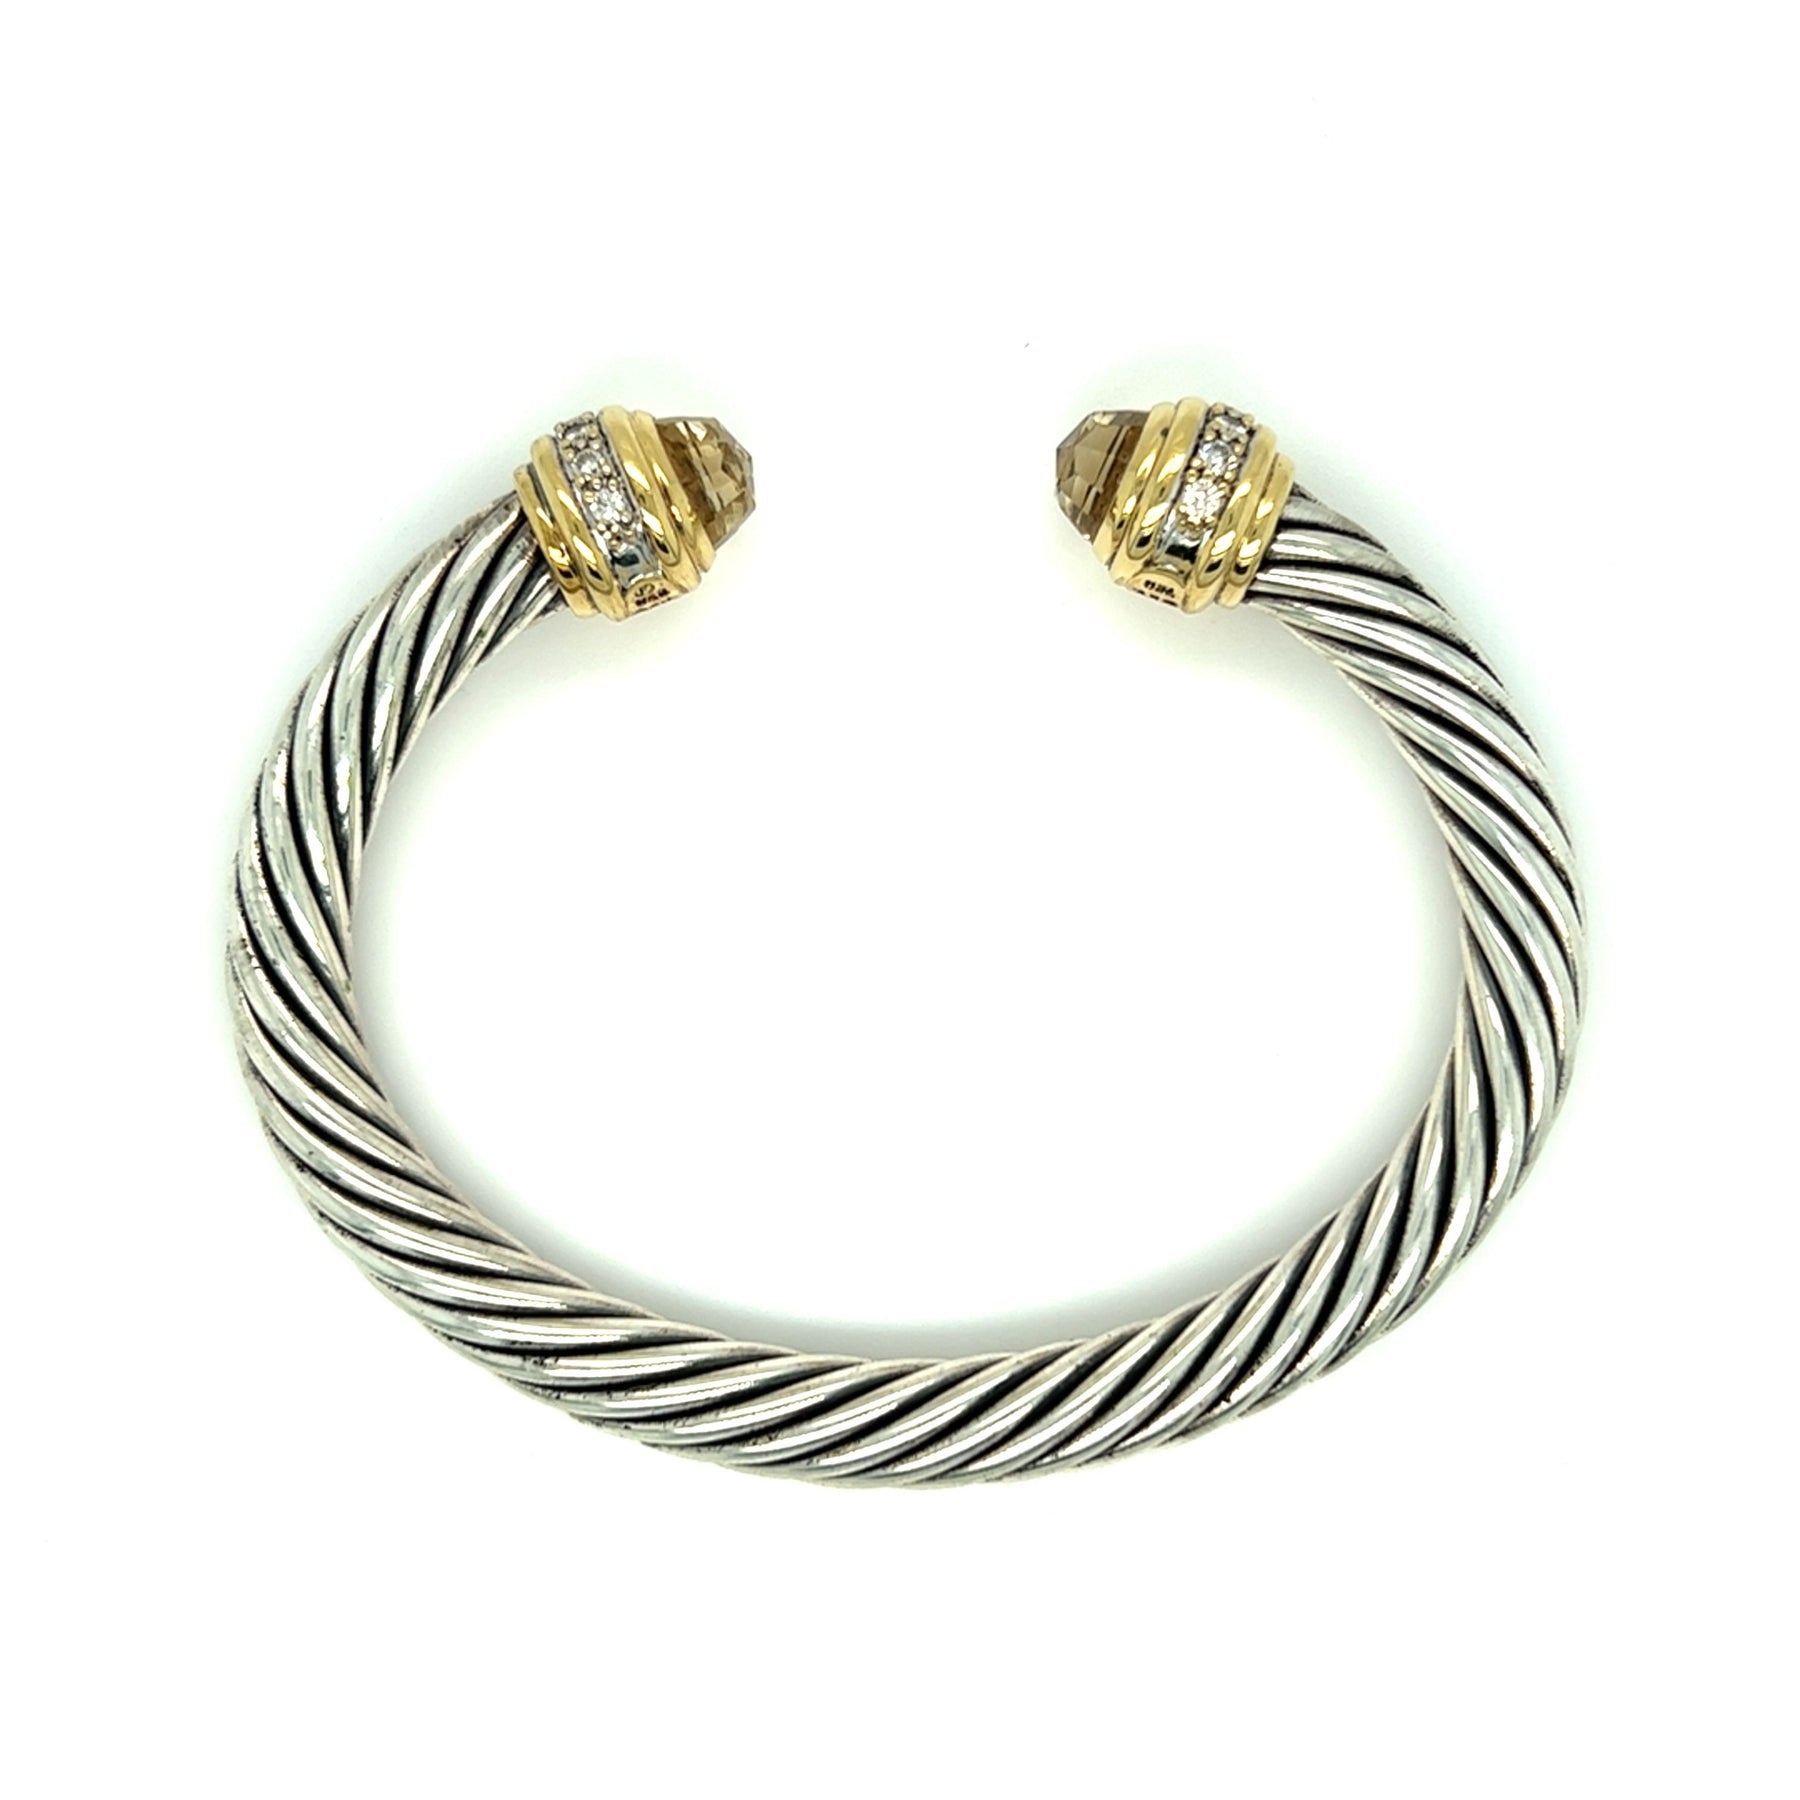 David Gems Diamond Are Silver Forever and and Bangle Cable Cuff Citrine – Yurman Bracelet